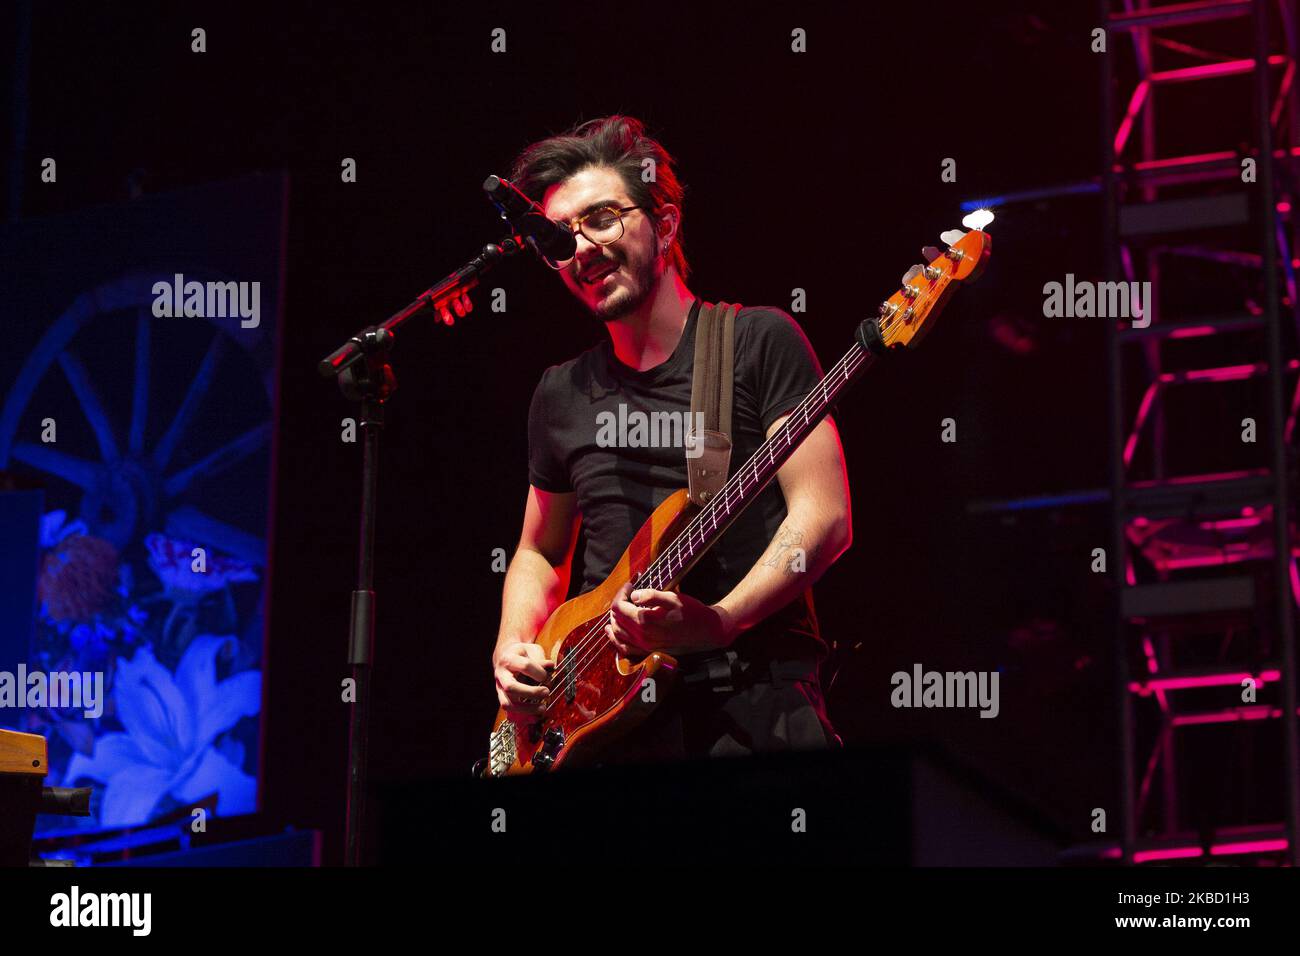 Singer and bass player Simon Vargas Morales of Colombian band Morat, performs during a concert as part of his tour 'Balas Perdidas' at WiZink Center in Madrid, Spain, 15 December 2019 (Photo by Oscar Gonzalez/NurPhoto) Stock Photo